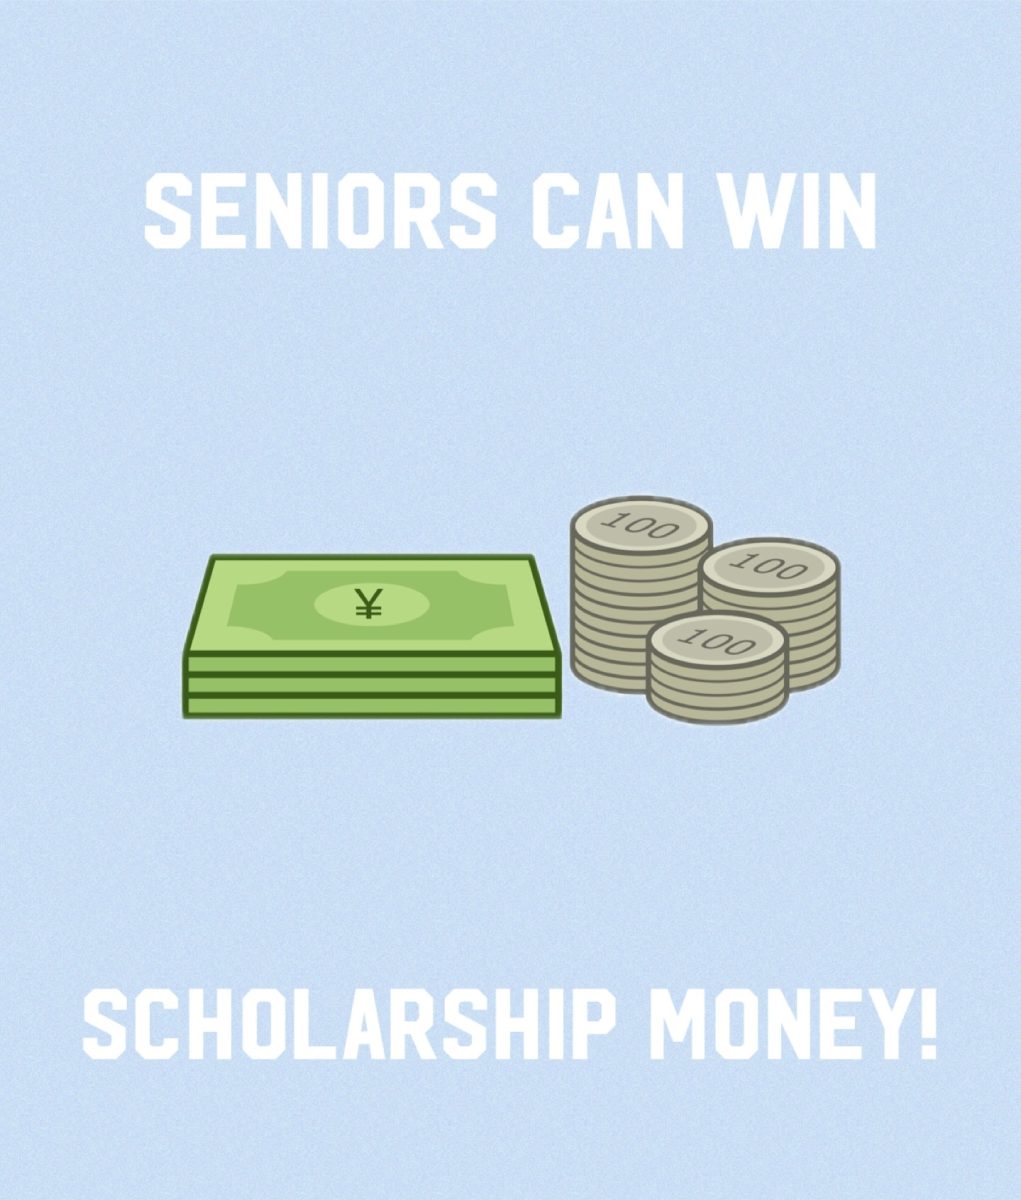 Scholarship deadlines are upon us.